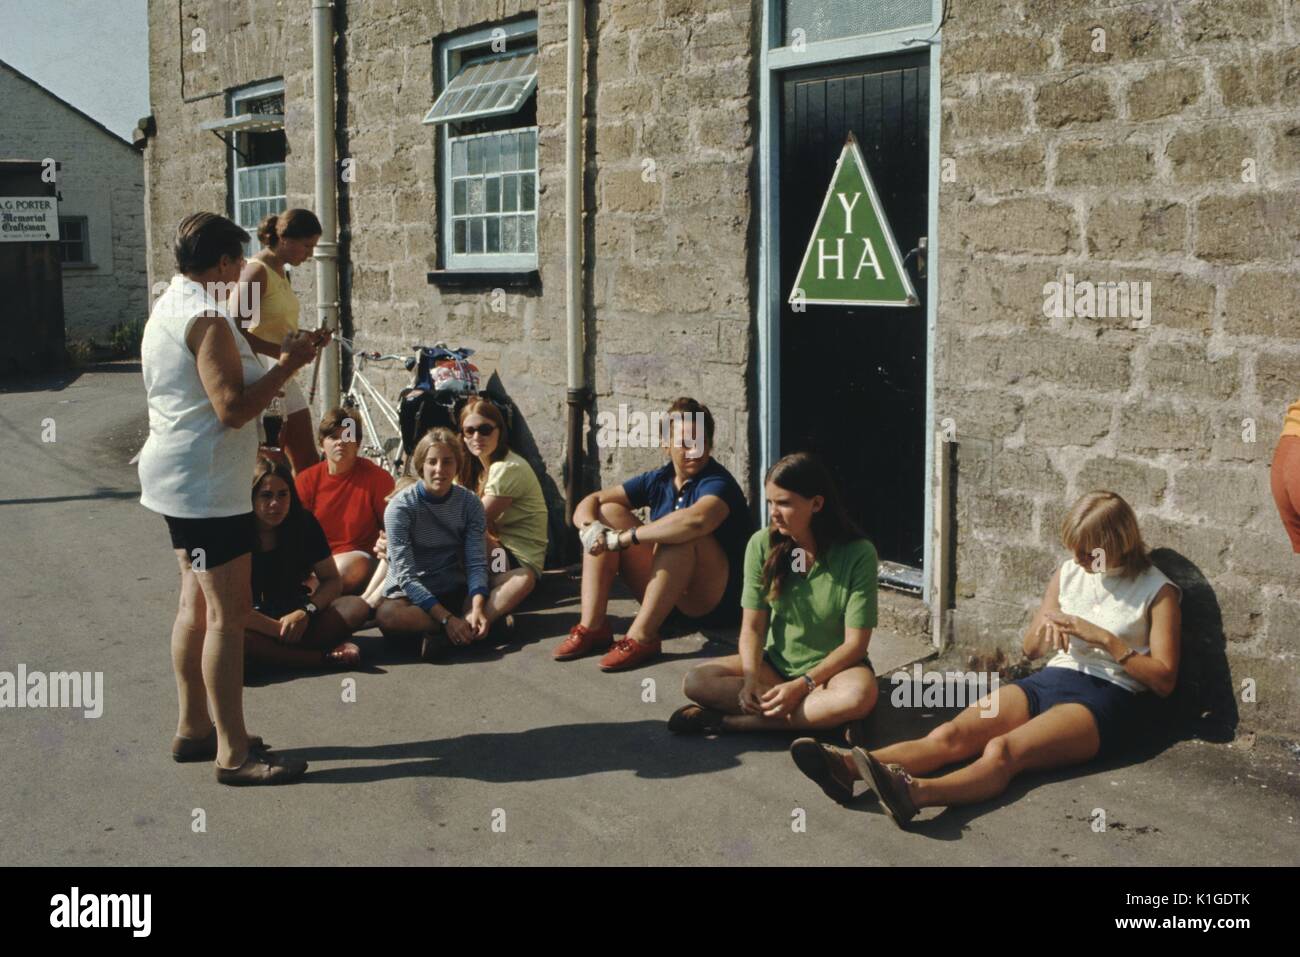 Group of teenage girls sitting outside a youth hostel, a mature woman standing in front of them and speaking to the group, Youth Hostel Association logo visible on the door of the hostel, England, 1966. Stock Photo